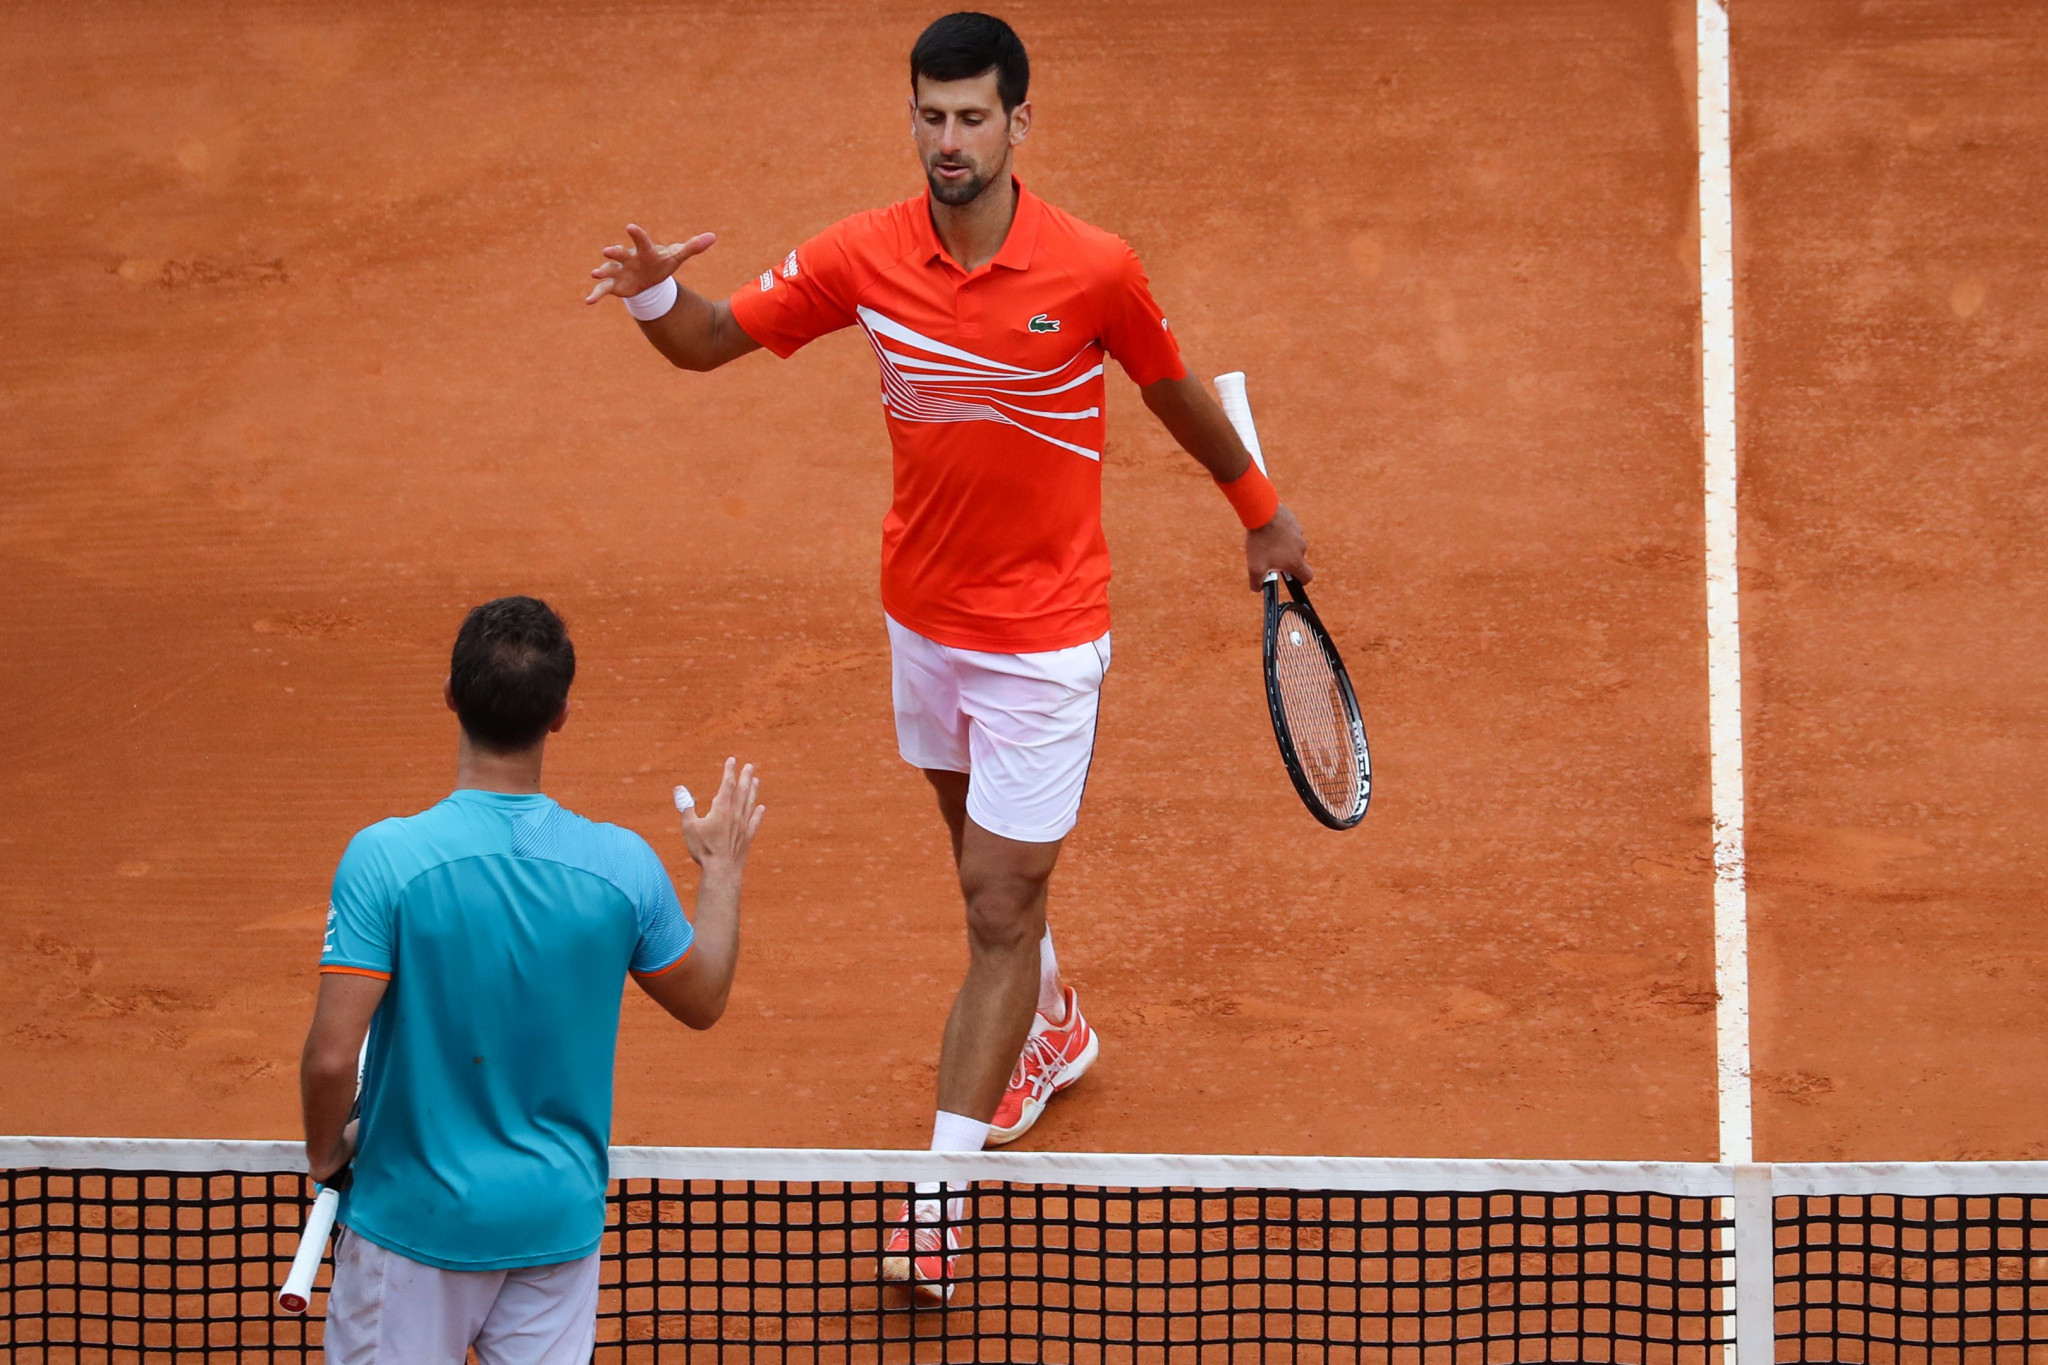 Novak Djokovic advancet to the third round of the Monte Carlo Masters event ©Getty Images